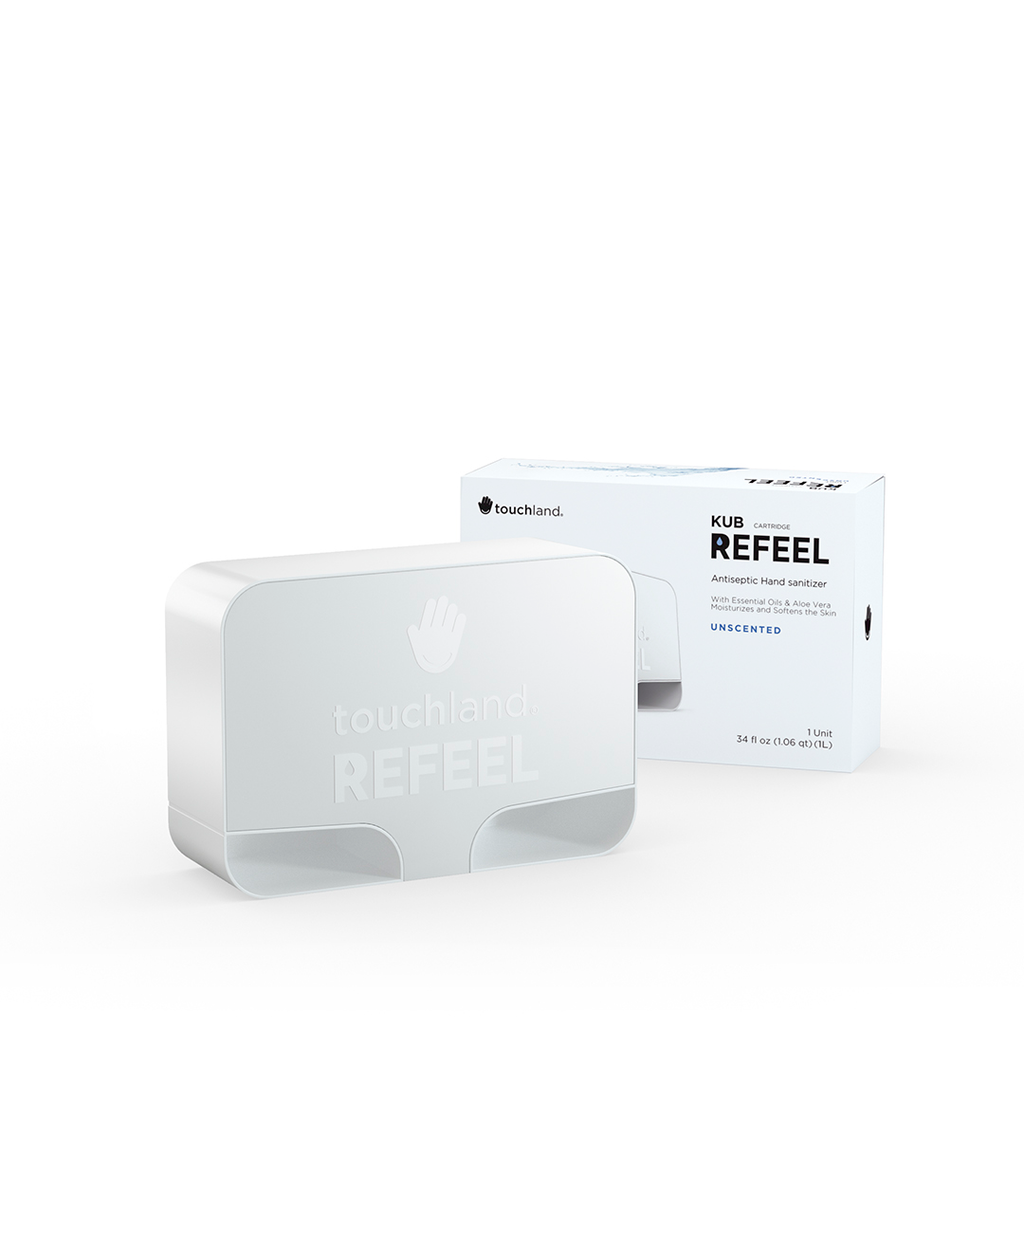 KUB refeel unscented in white on white background